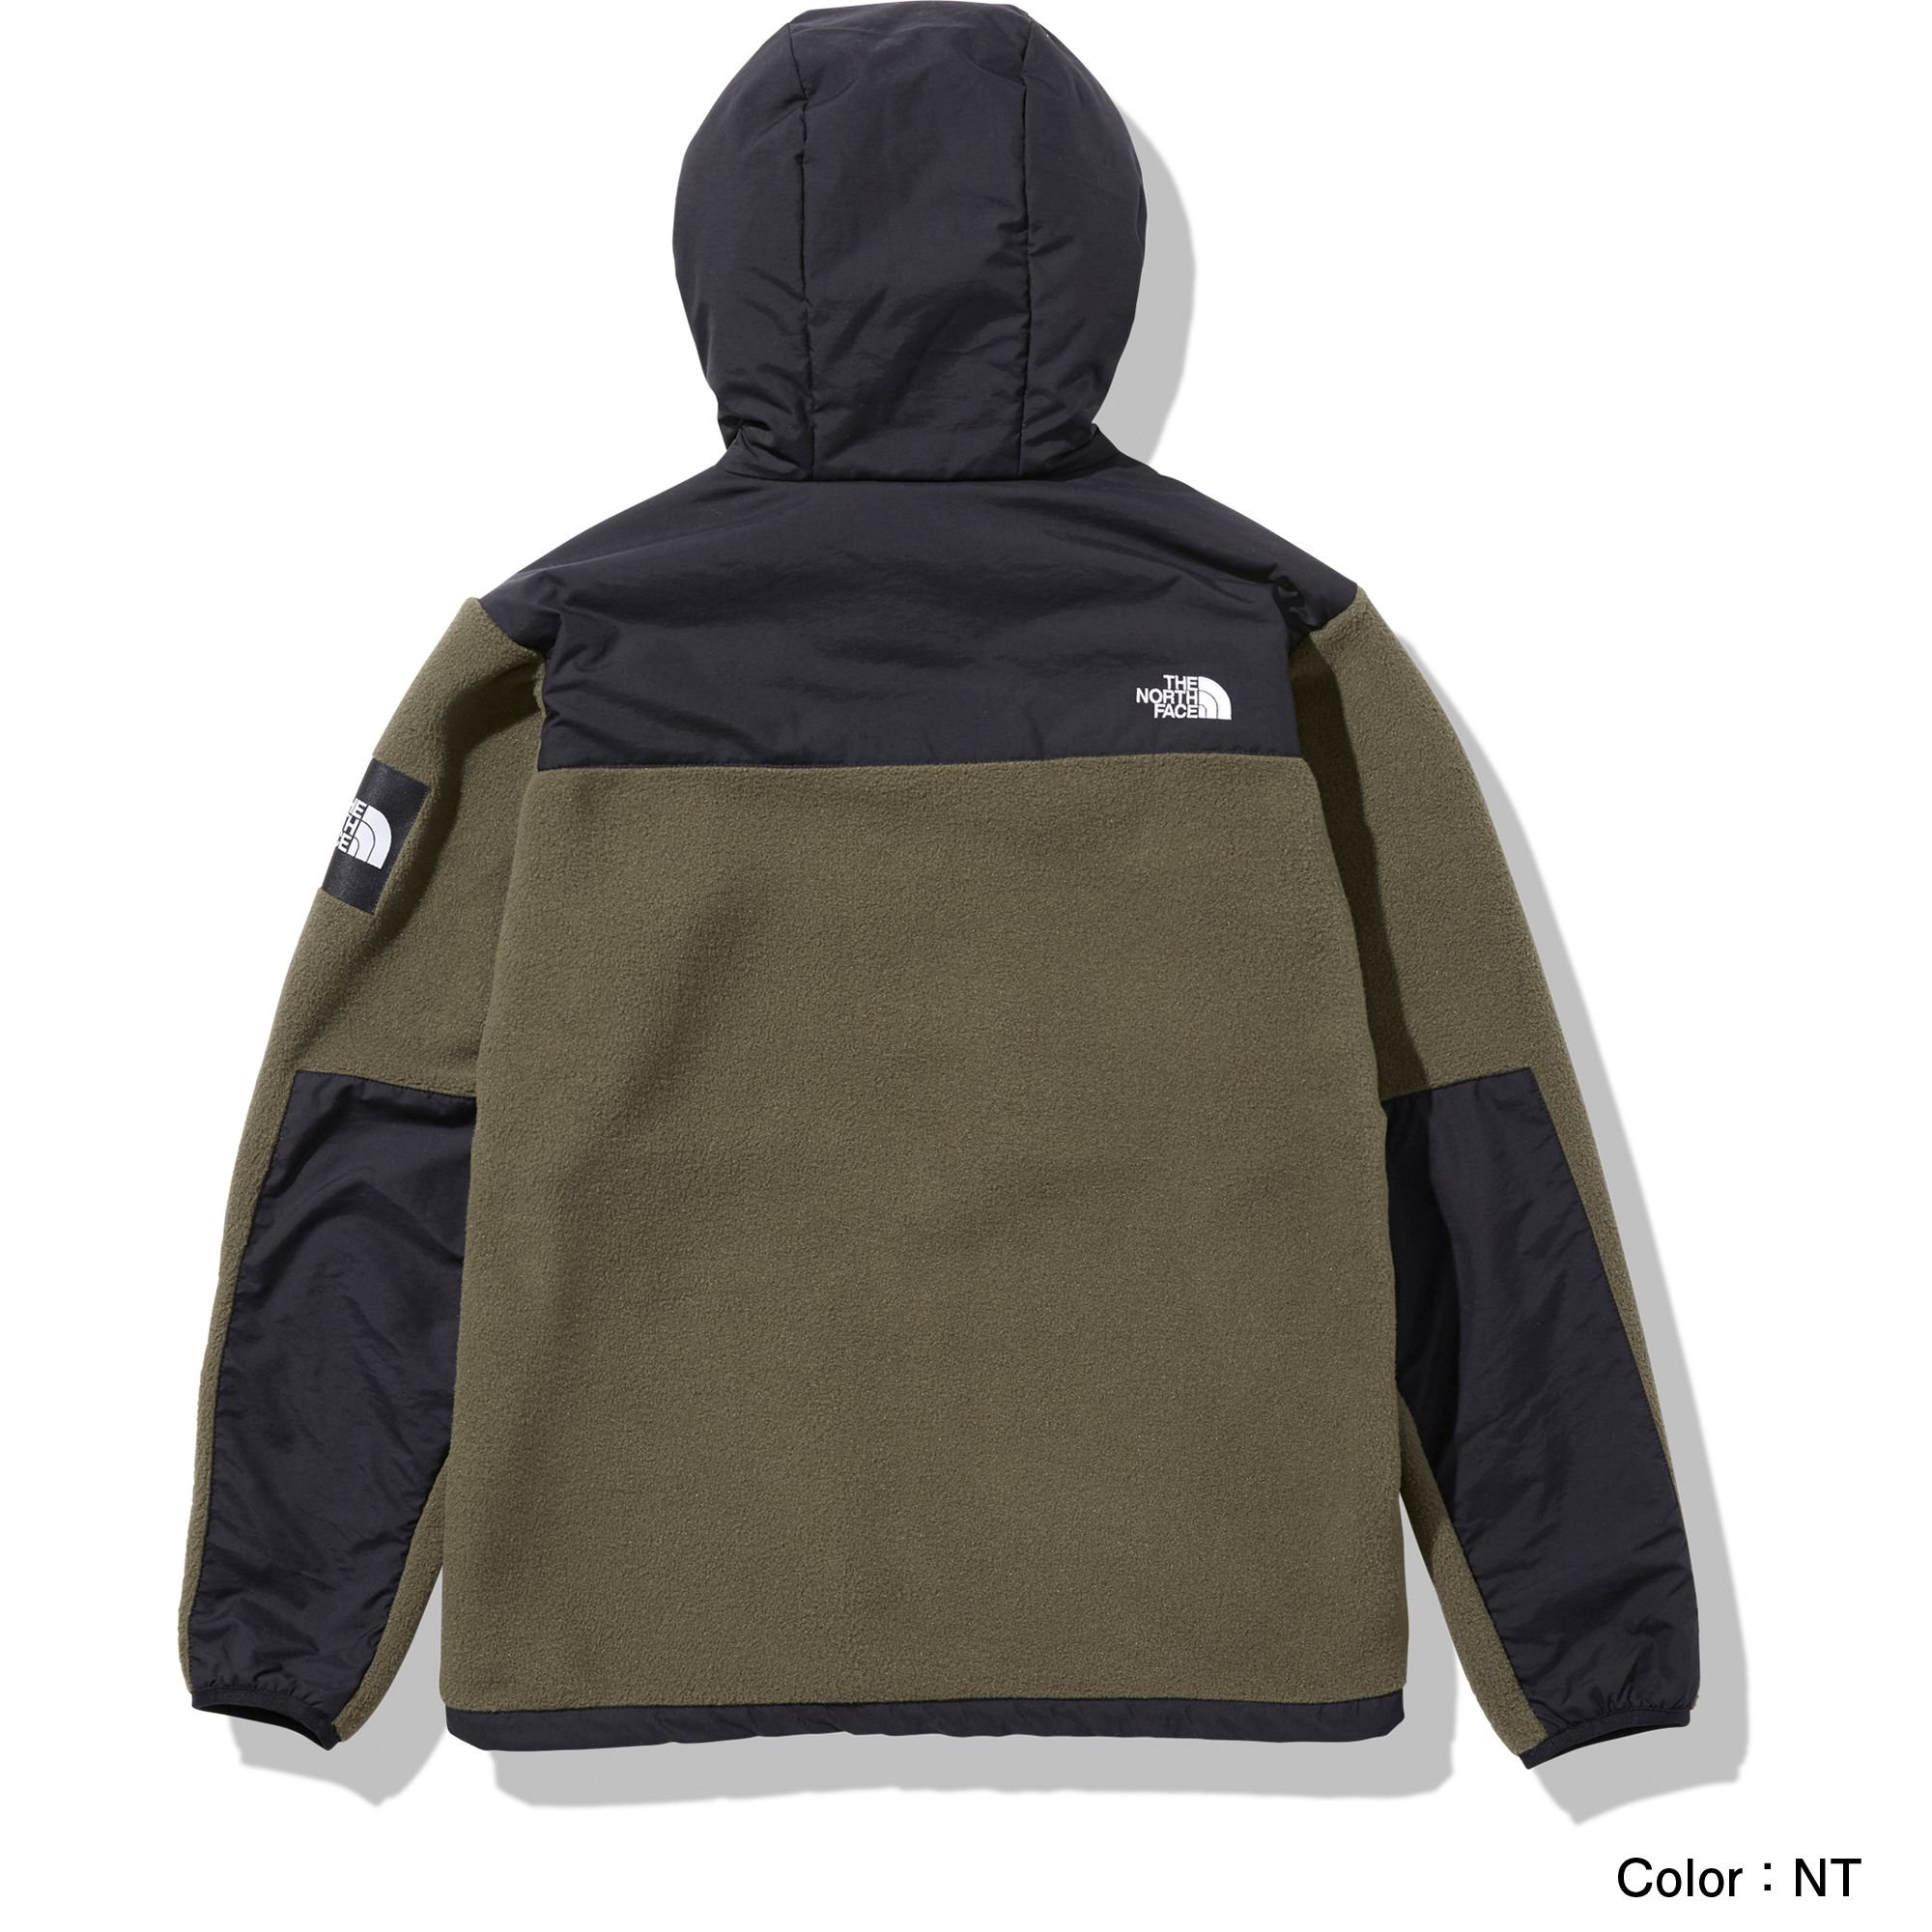 north face denali hood products for sale